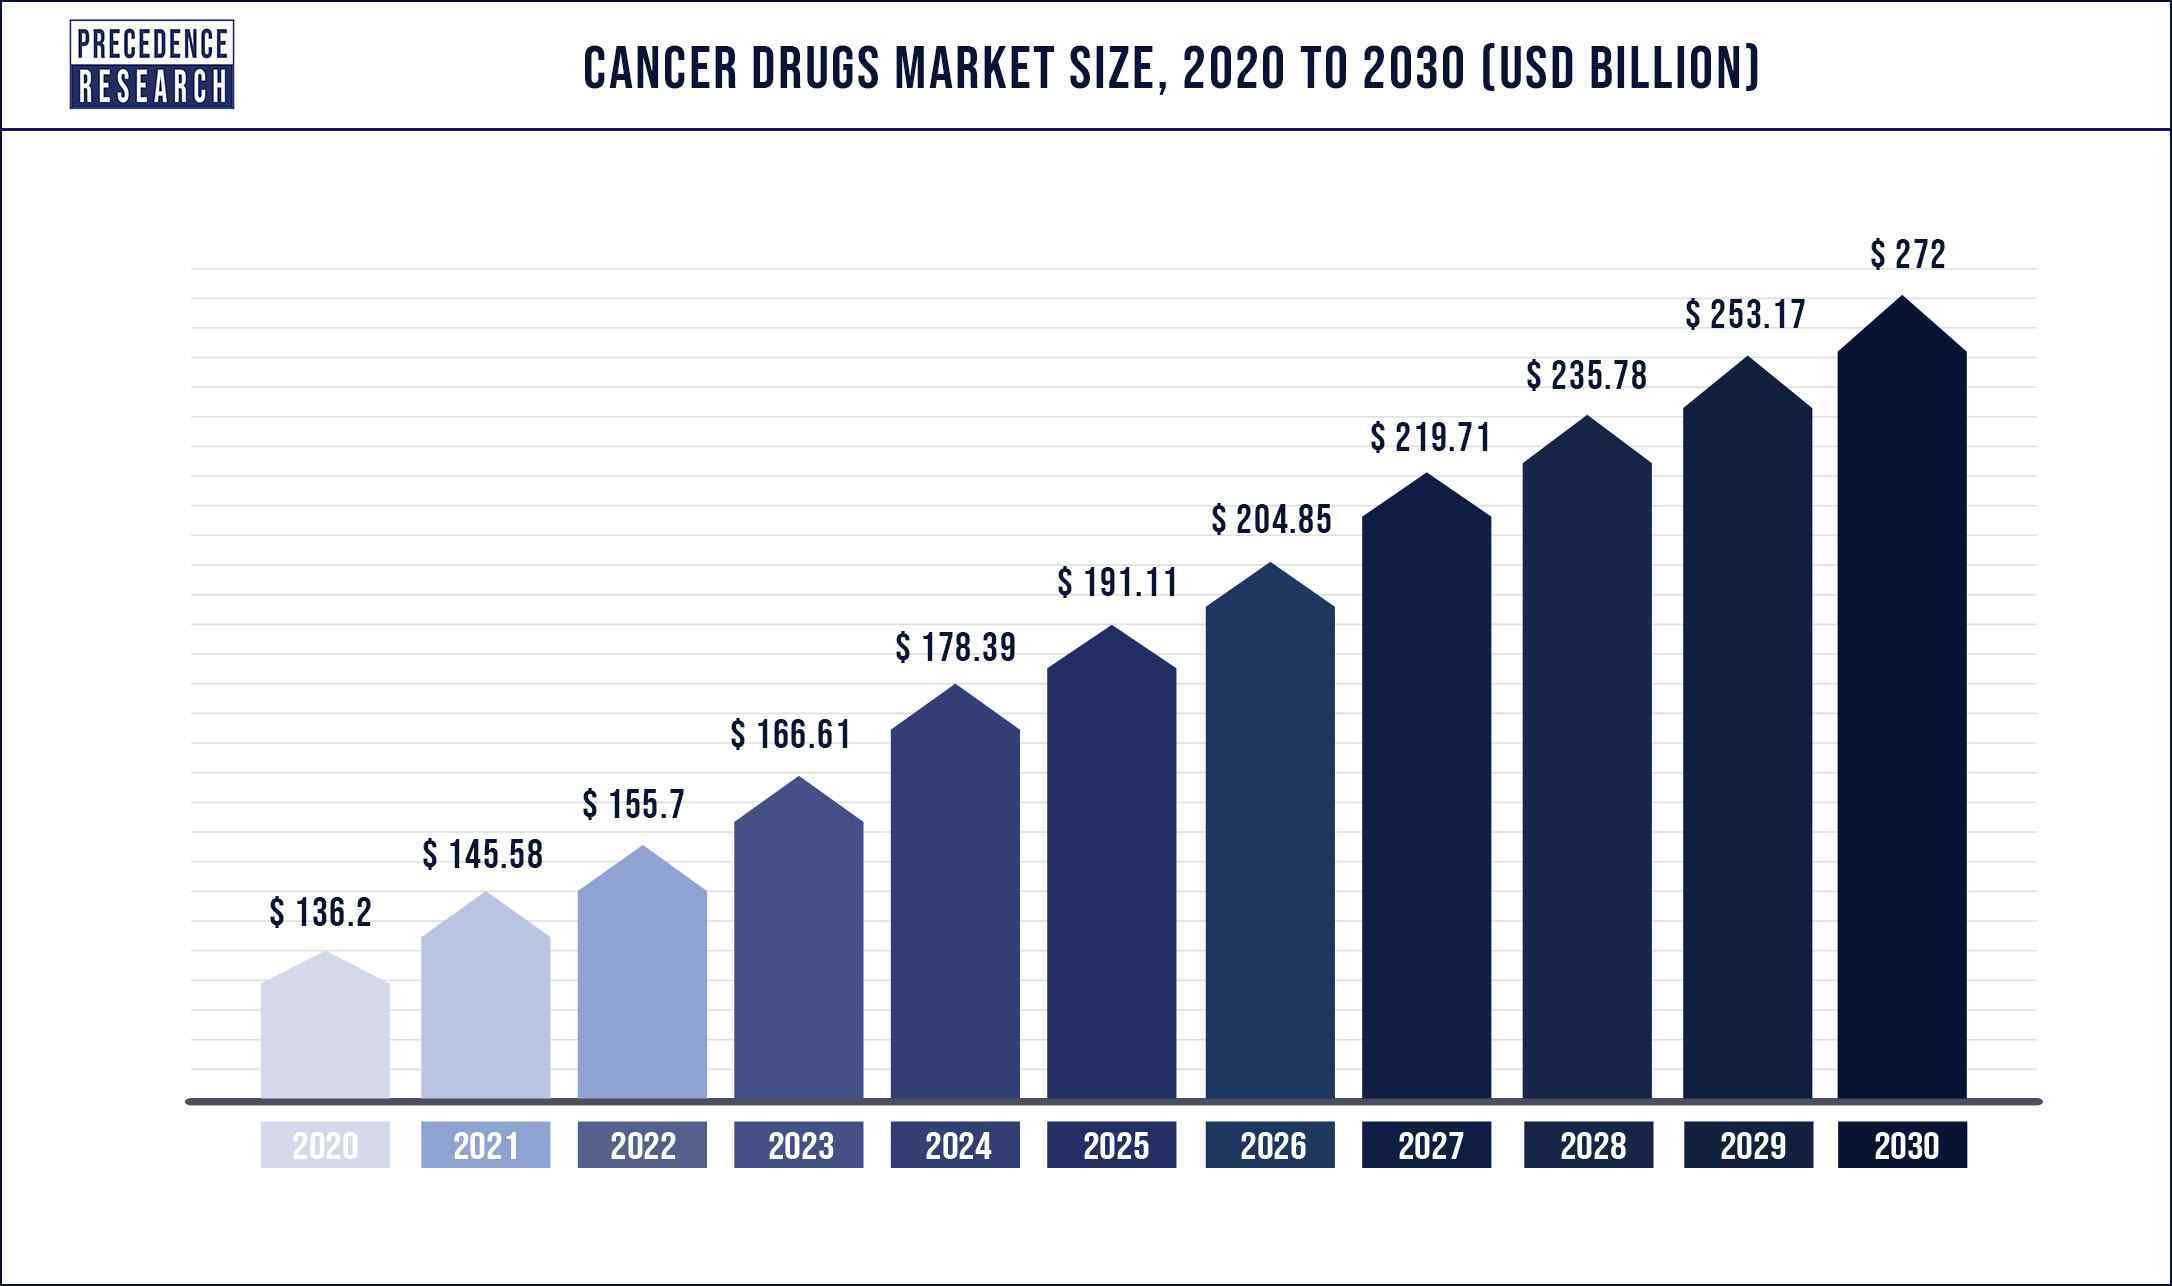 Cancer Drugs Market Size 2020 to 2030